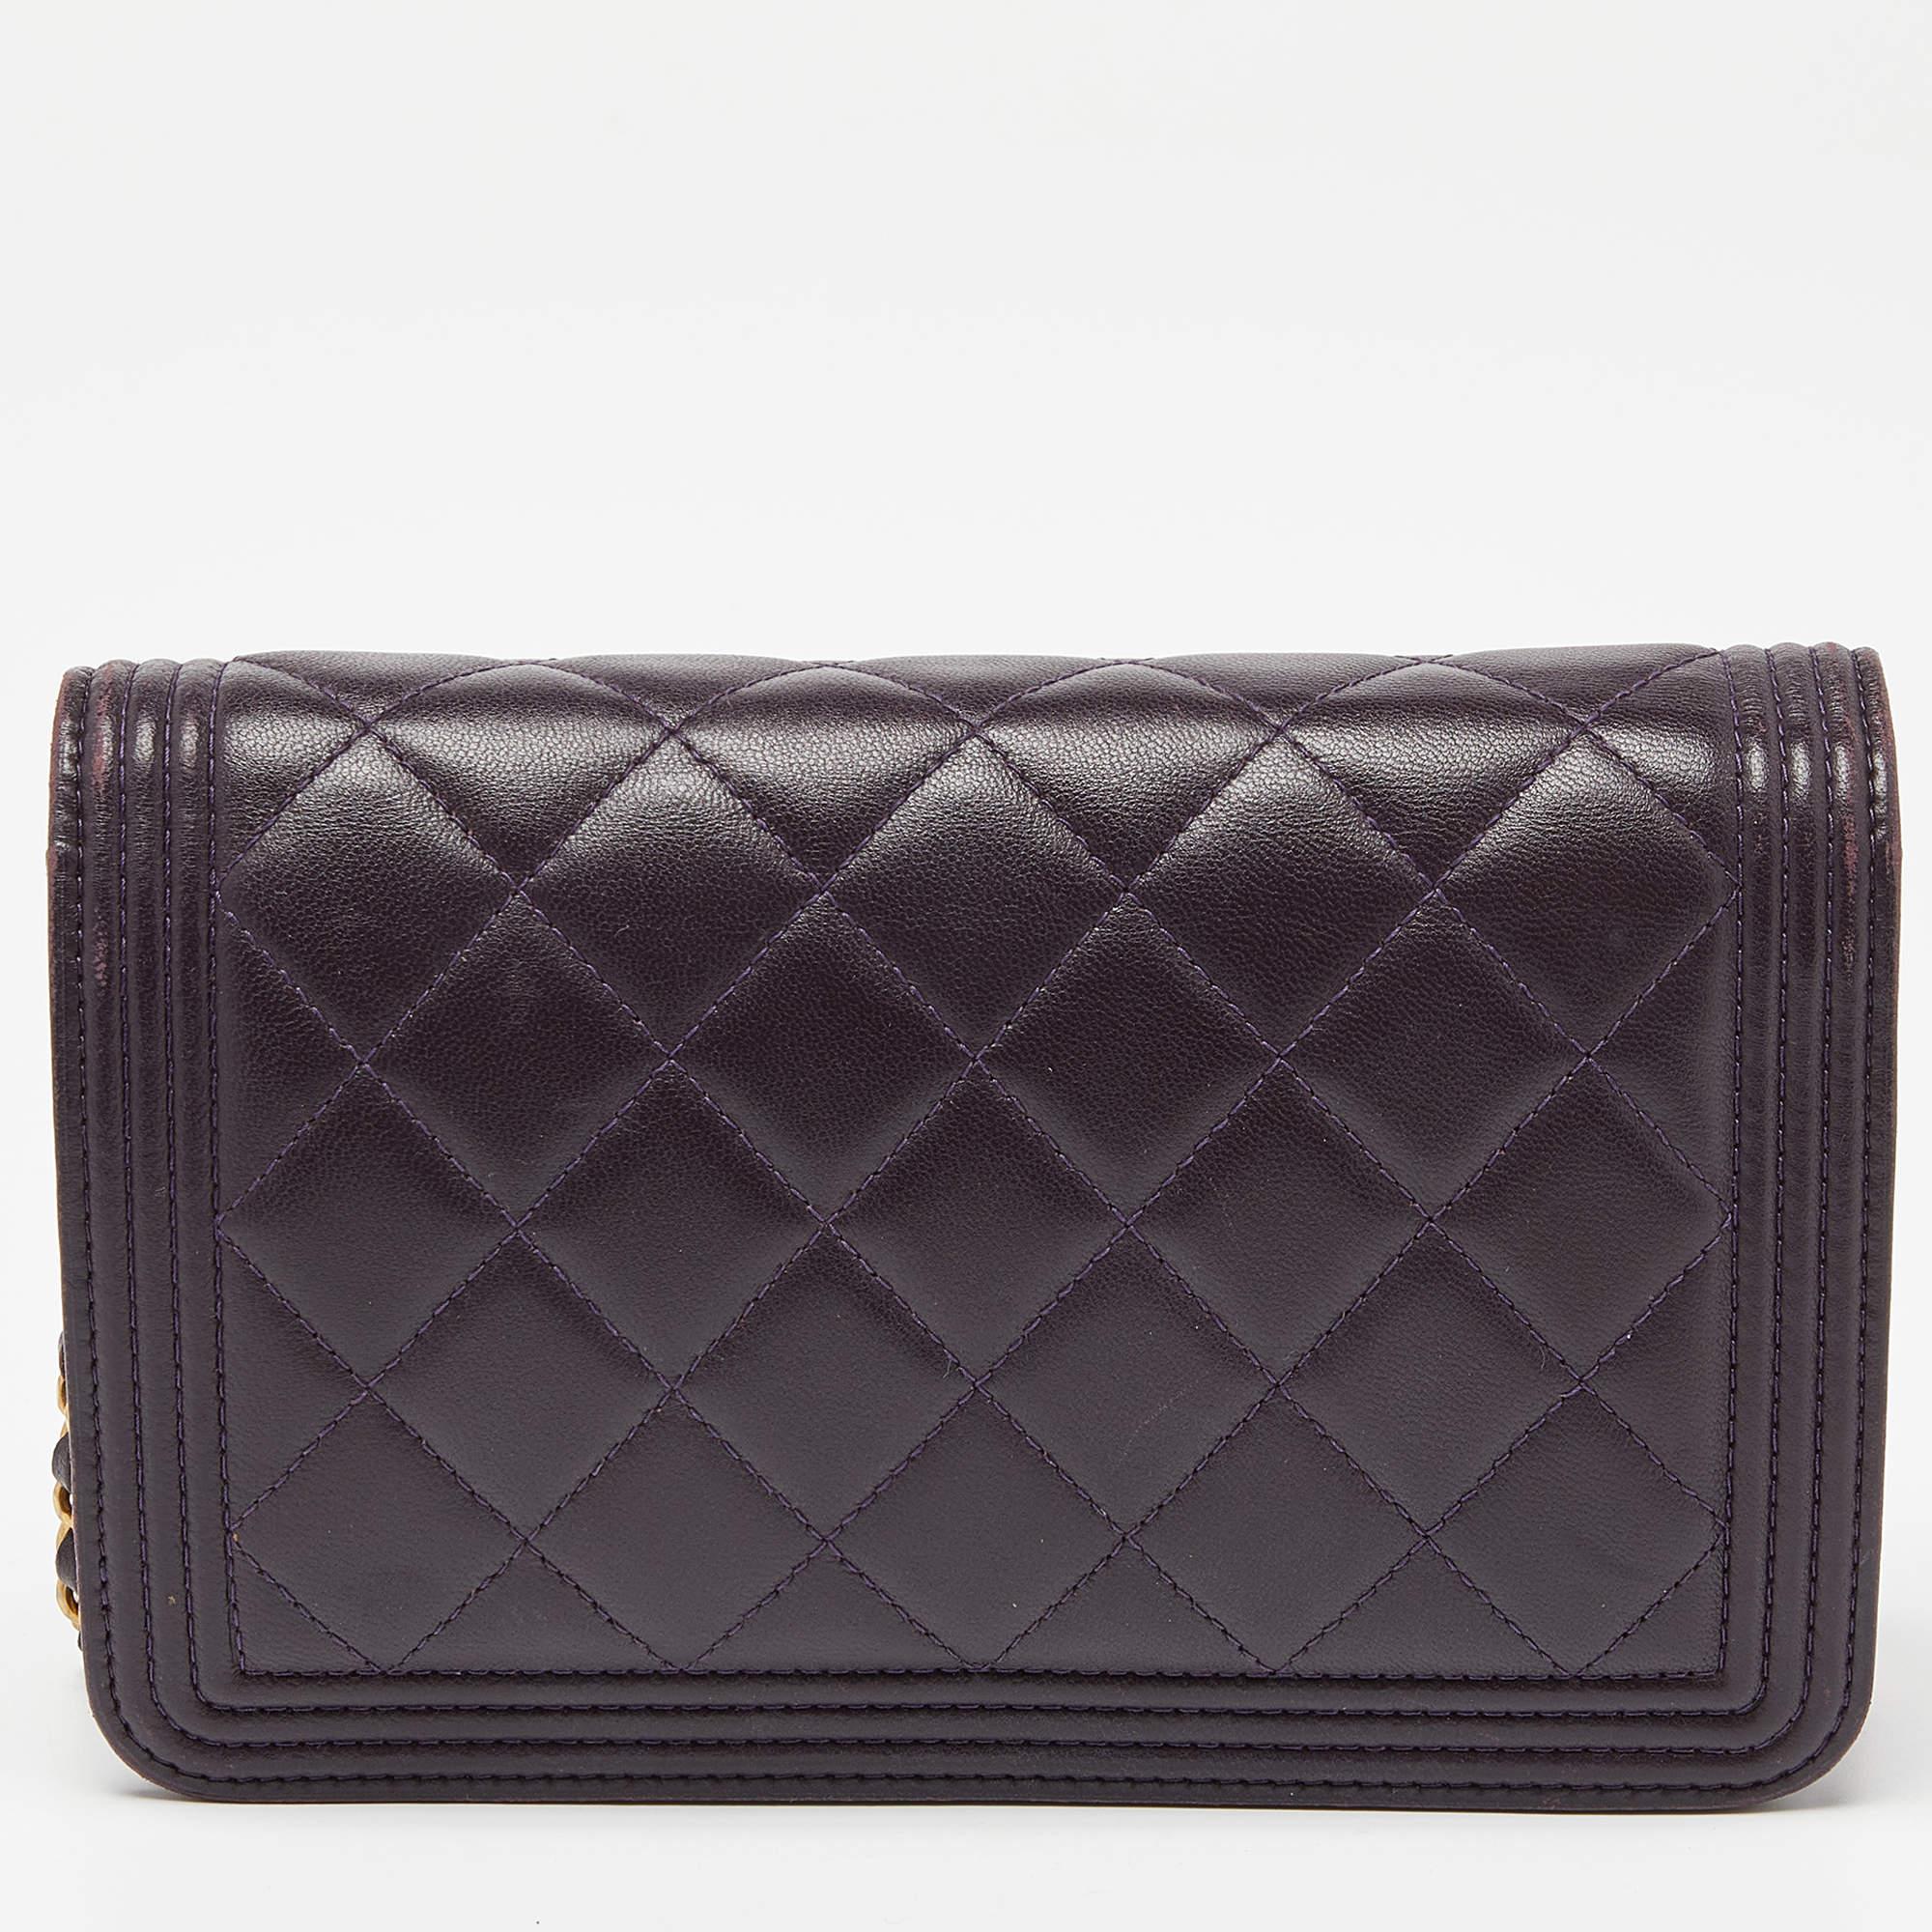 Classy and super stylish, this WOC bag is a creation by Chanel. It has been wonderfully crafted from purple-hued leather and enhanced with the signature quilt. The insides are lined with leather & fabric and sized to carry your necessities. The bag